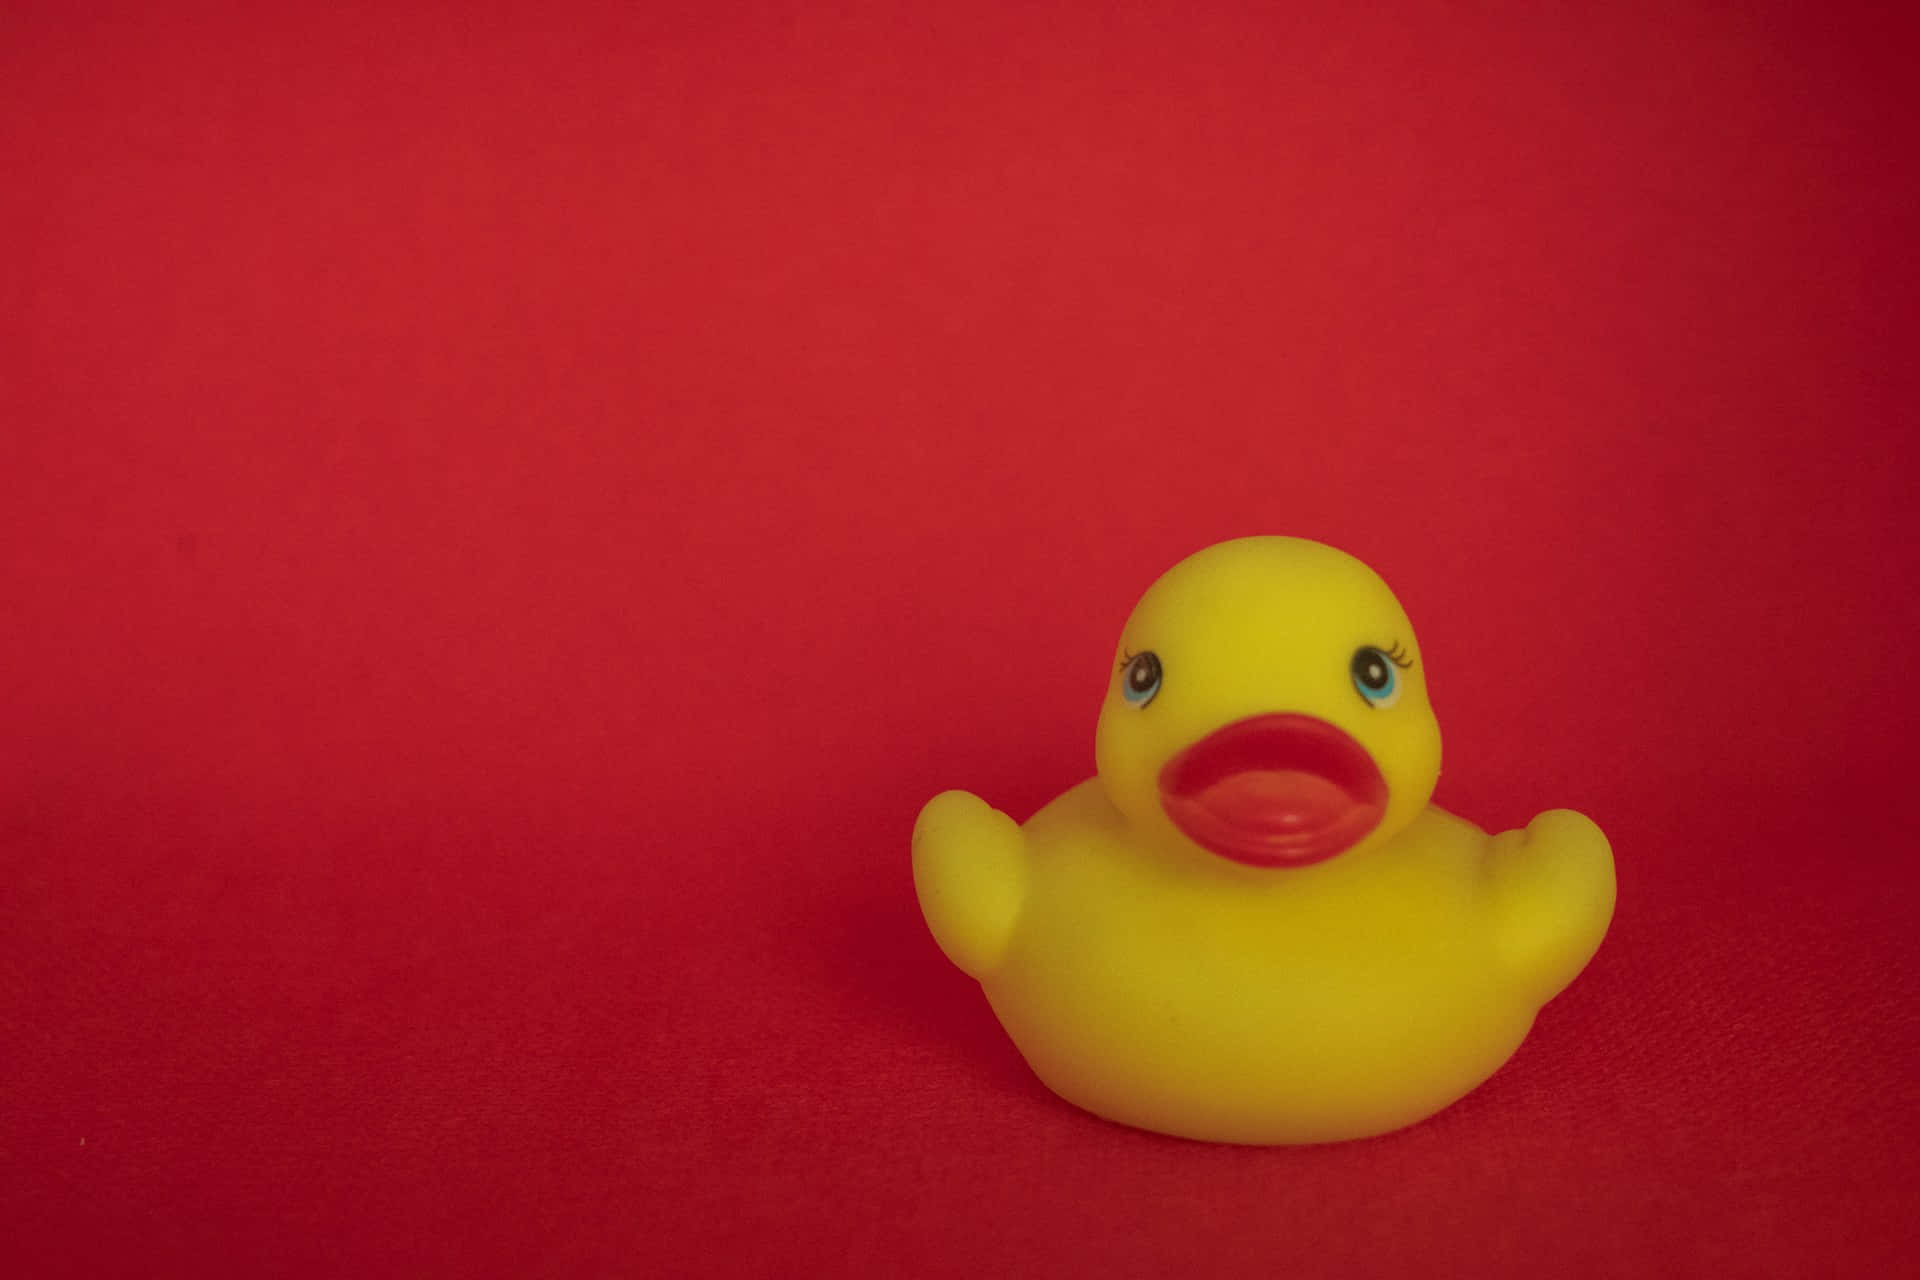 Yellow Rubber Ducky Red Background Wallpaper